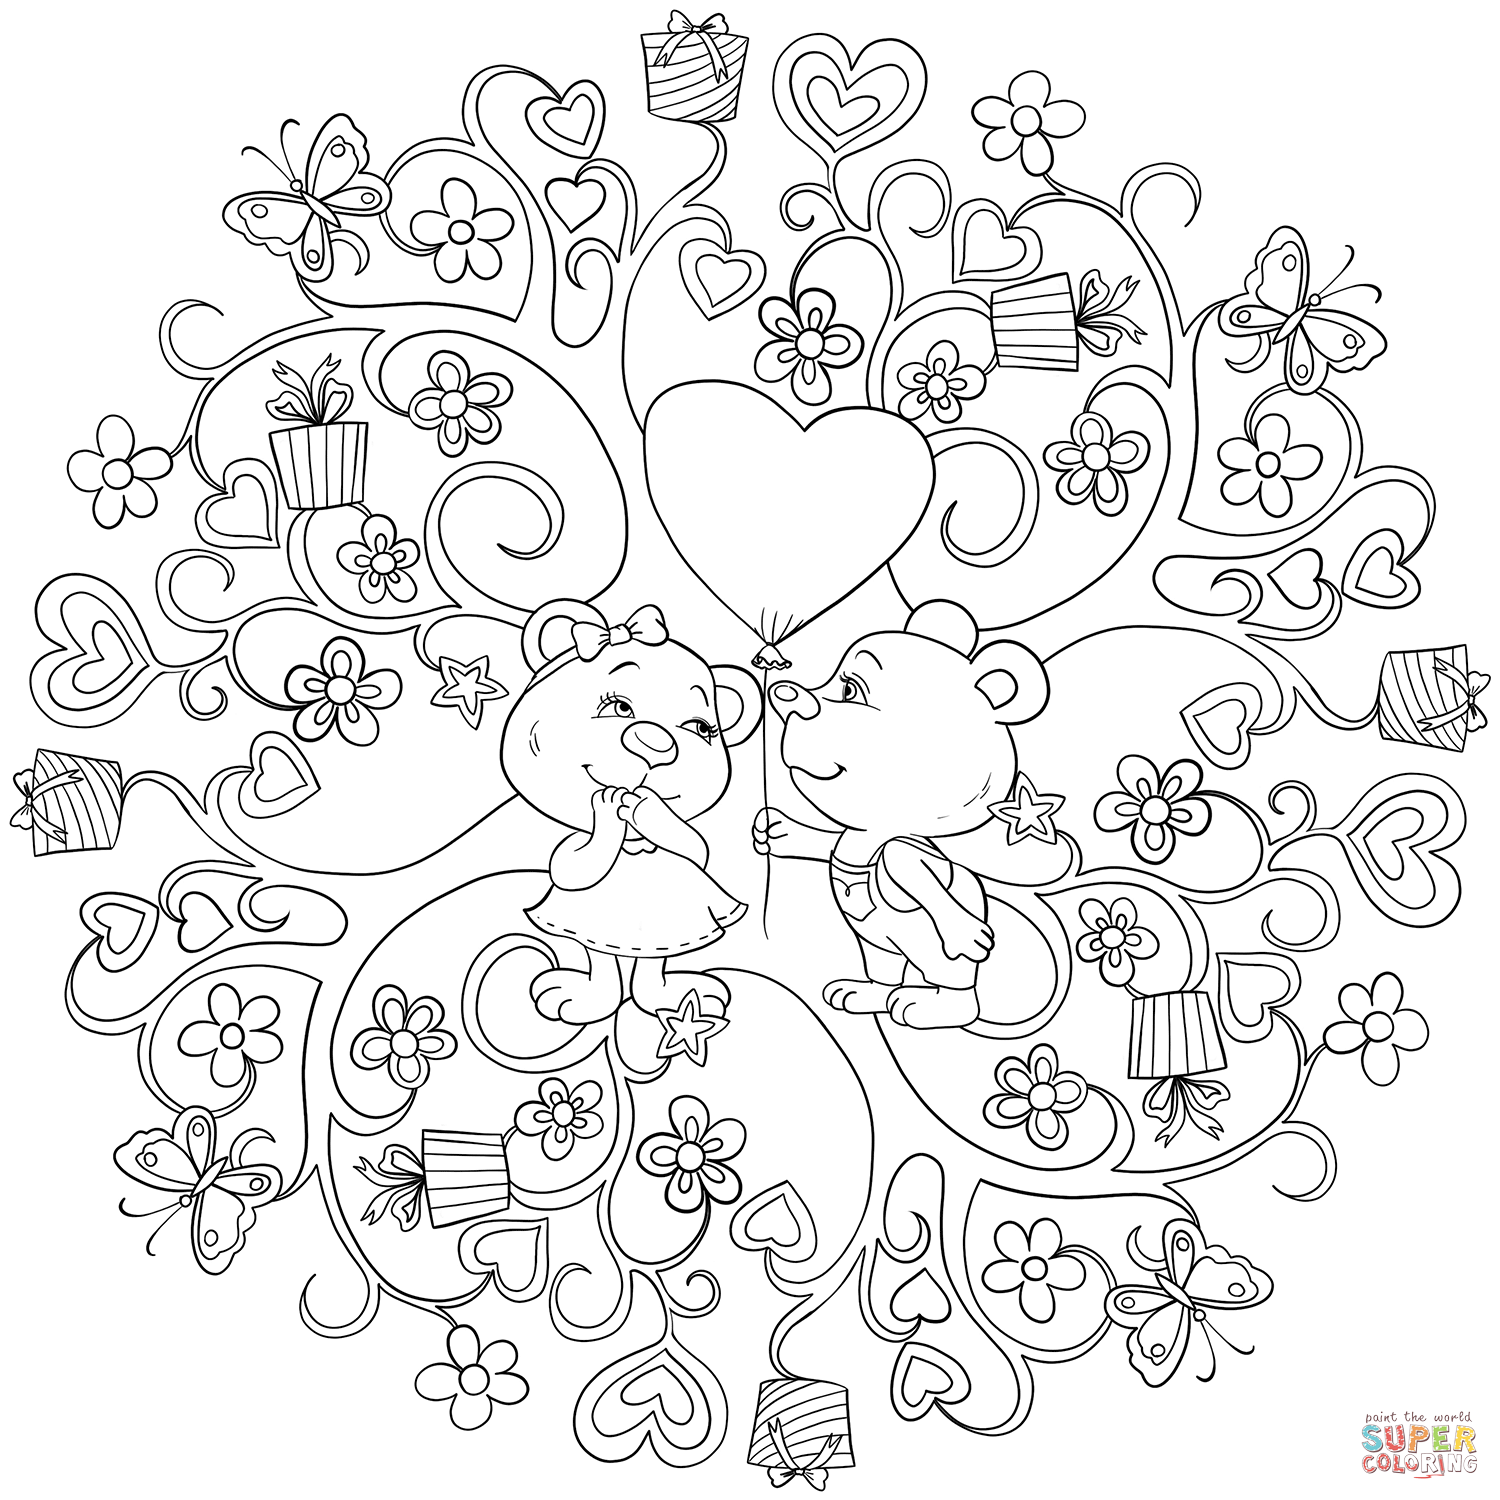 St valentine mandala with two cute bears coloring page free printable coloring pages